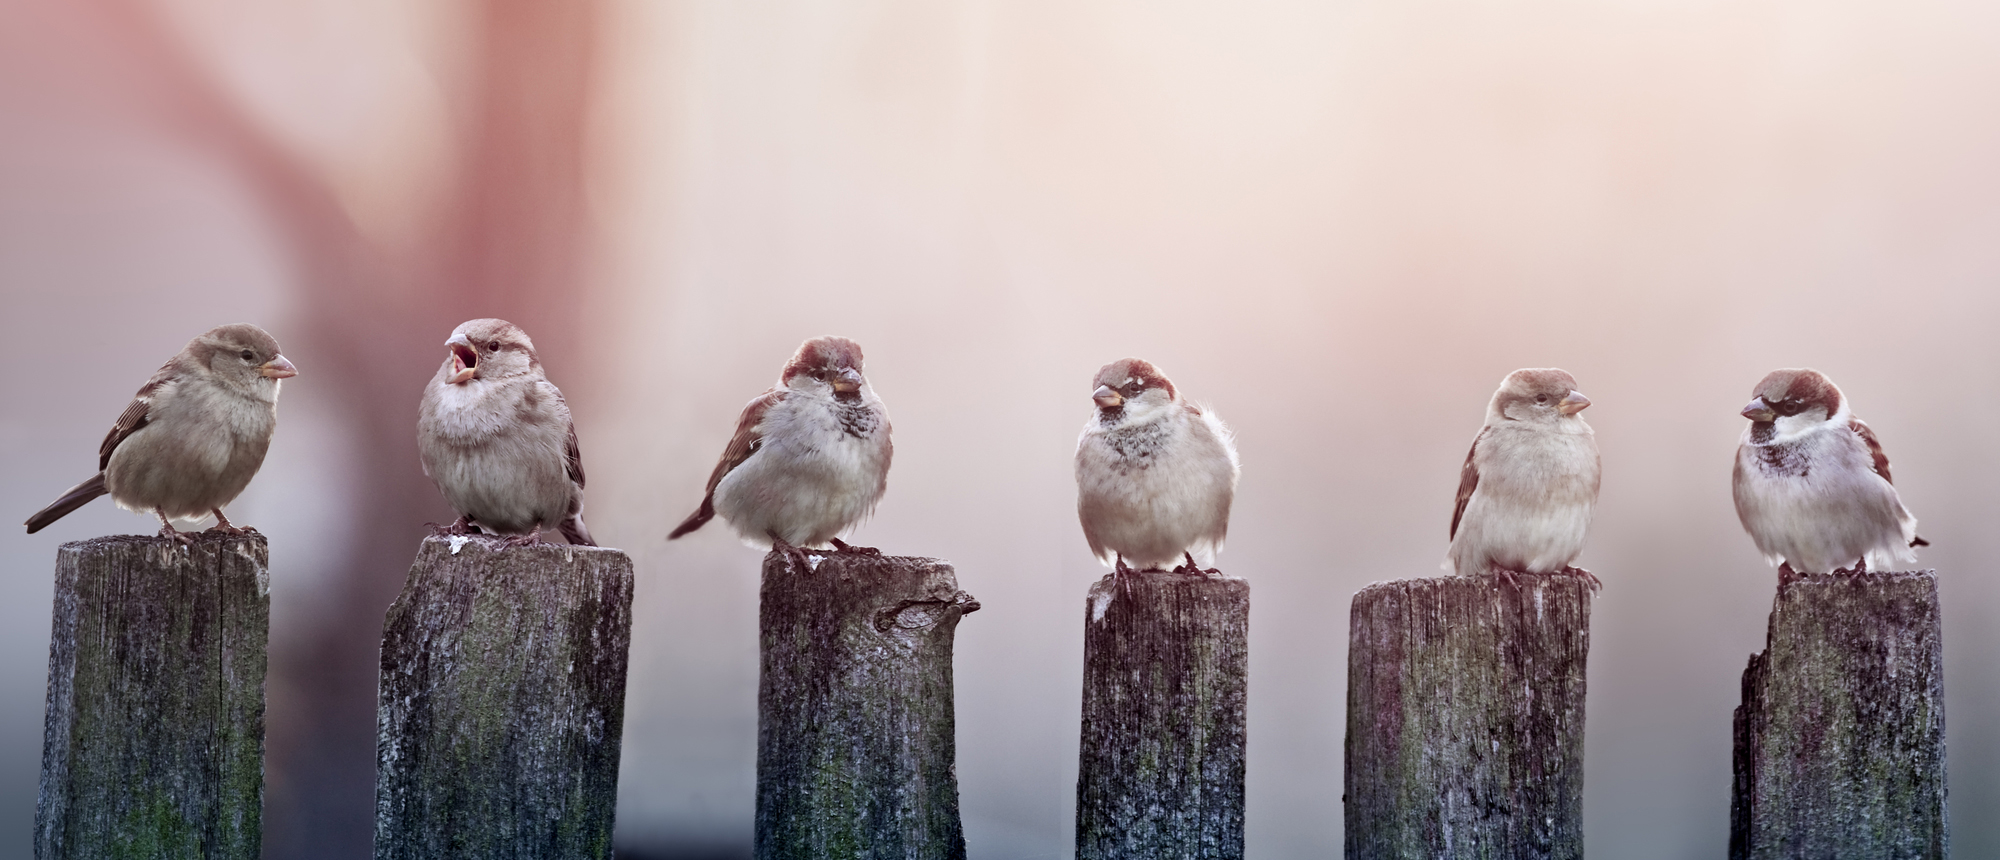 Sparrows in a row on wooden fence